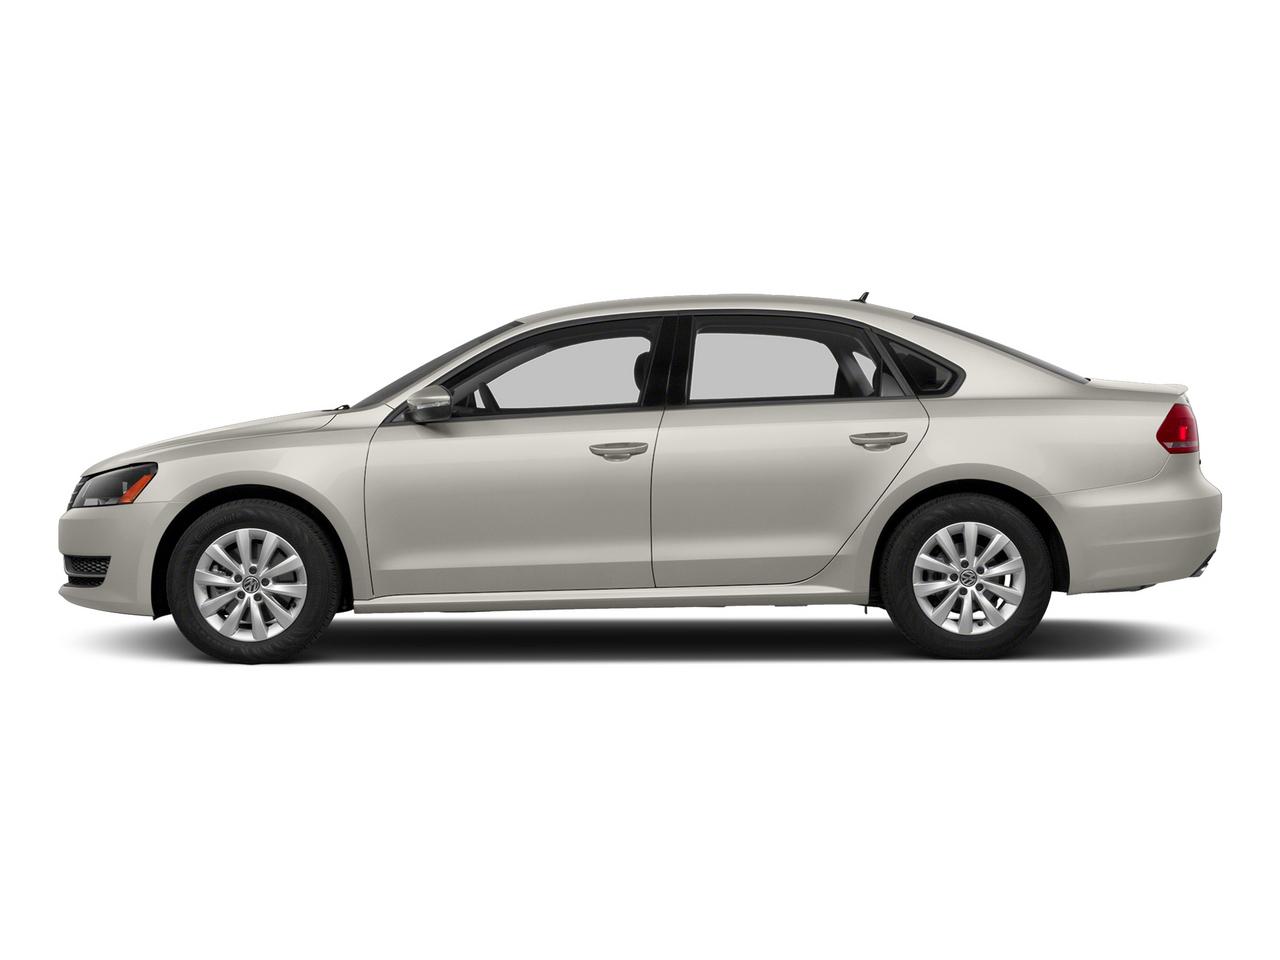 Used 2015 Volkswagen Passat SEL Premium with VIN 1VWCM7A3XFC008811 for sale in Gurnee, IL